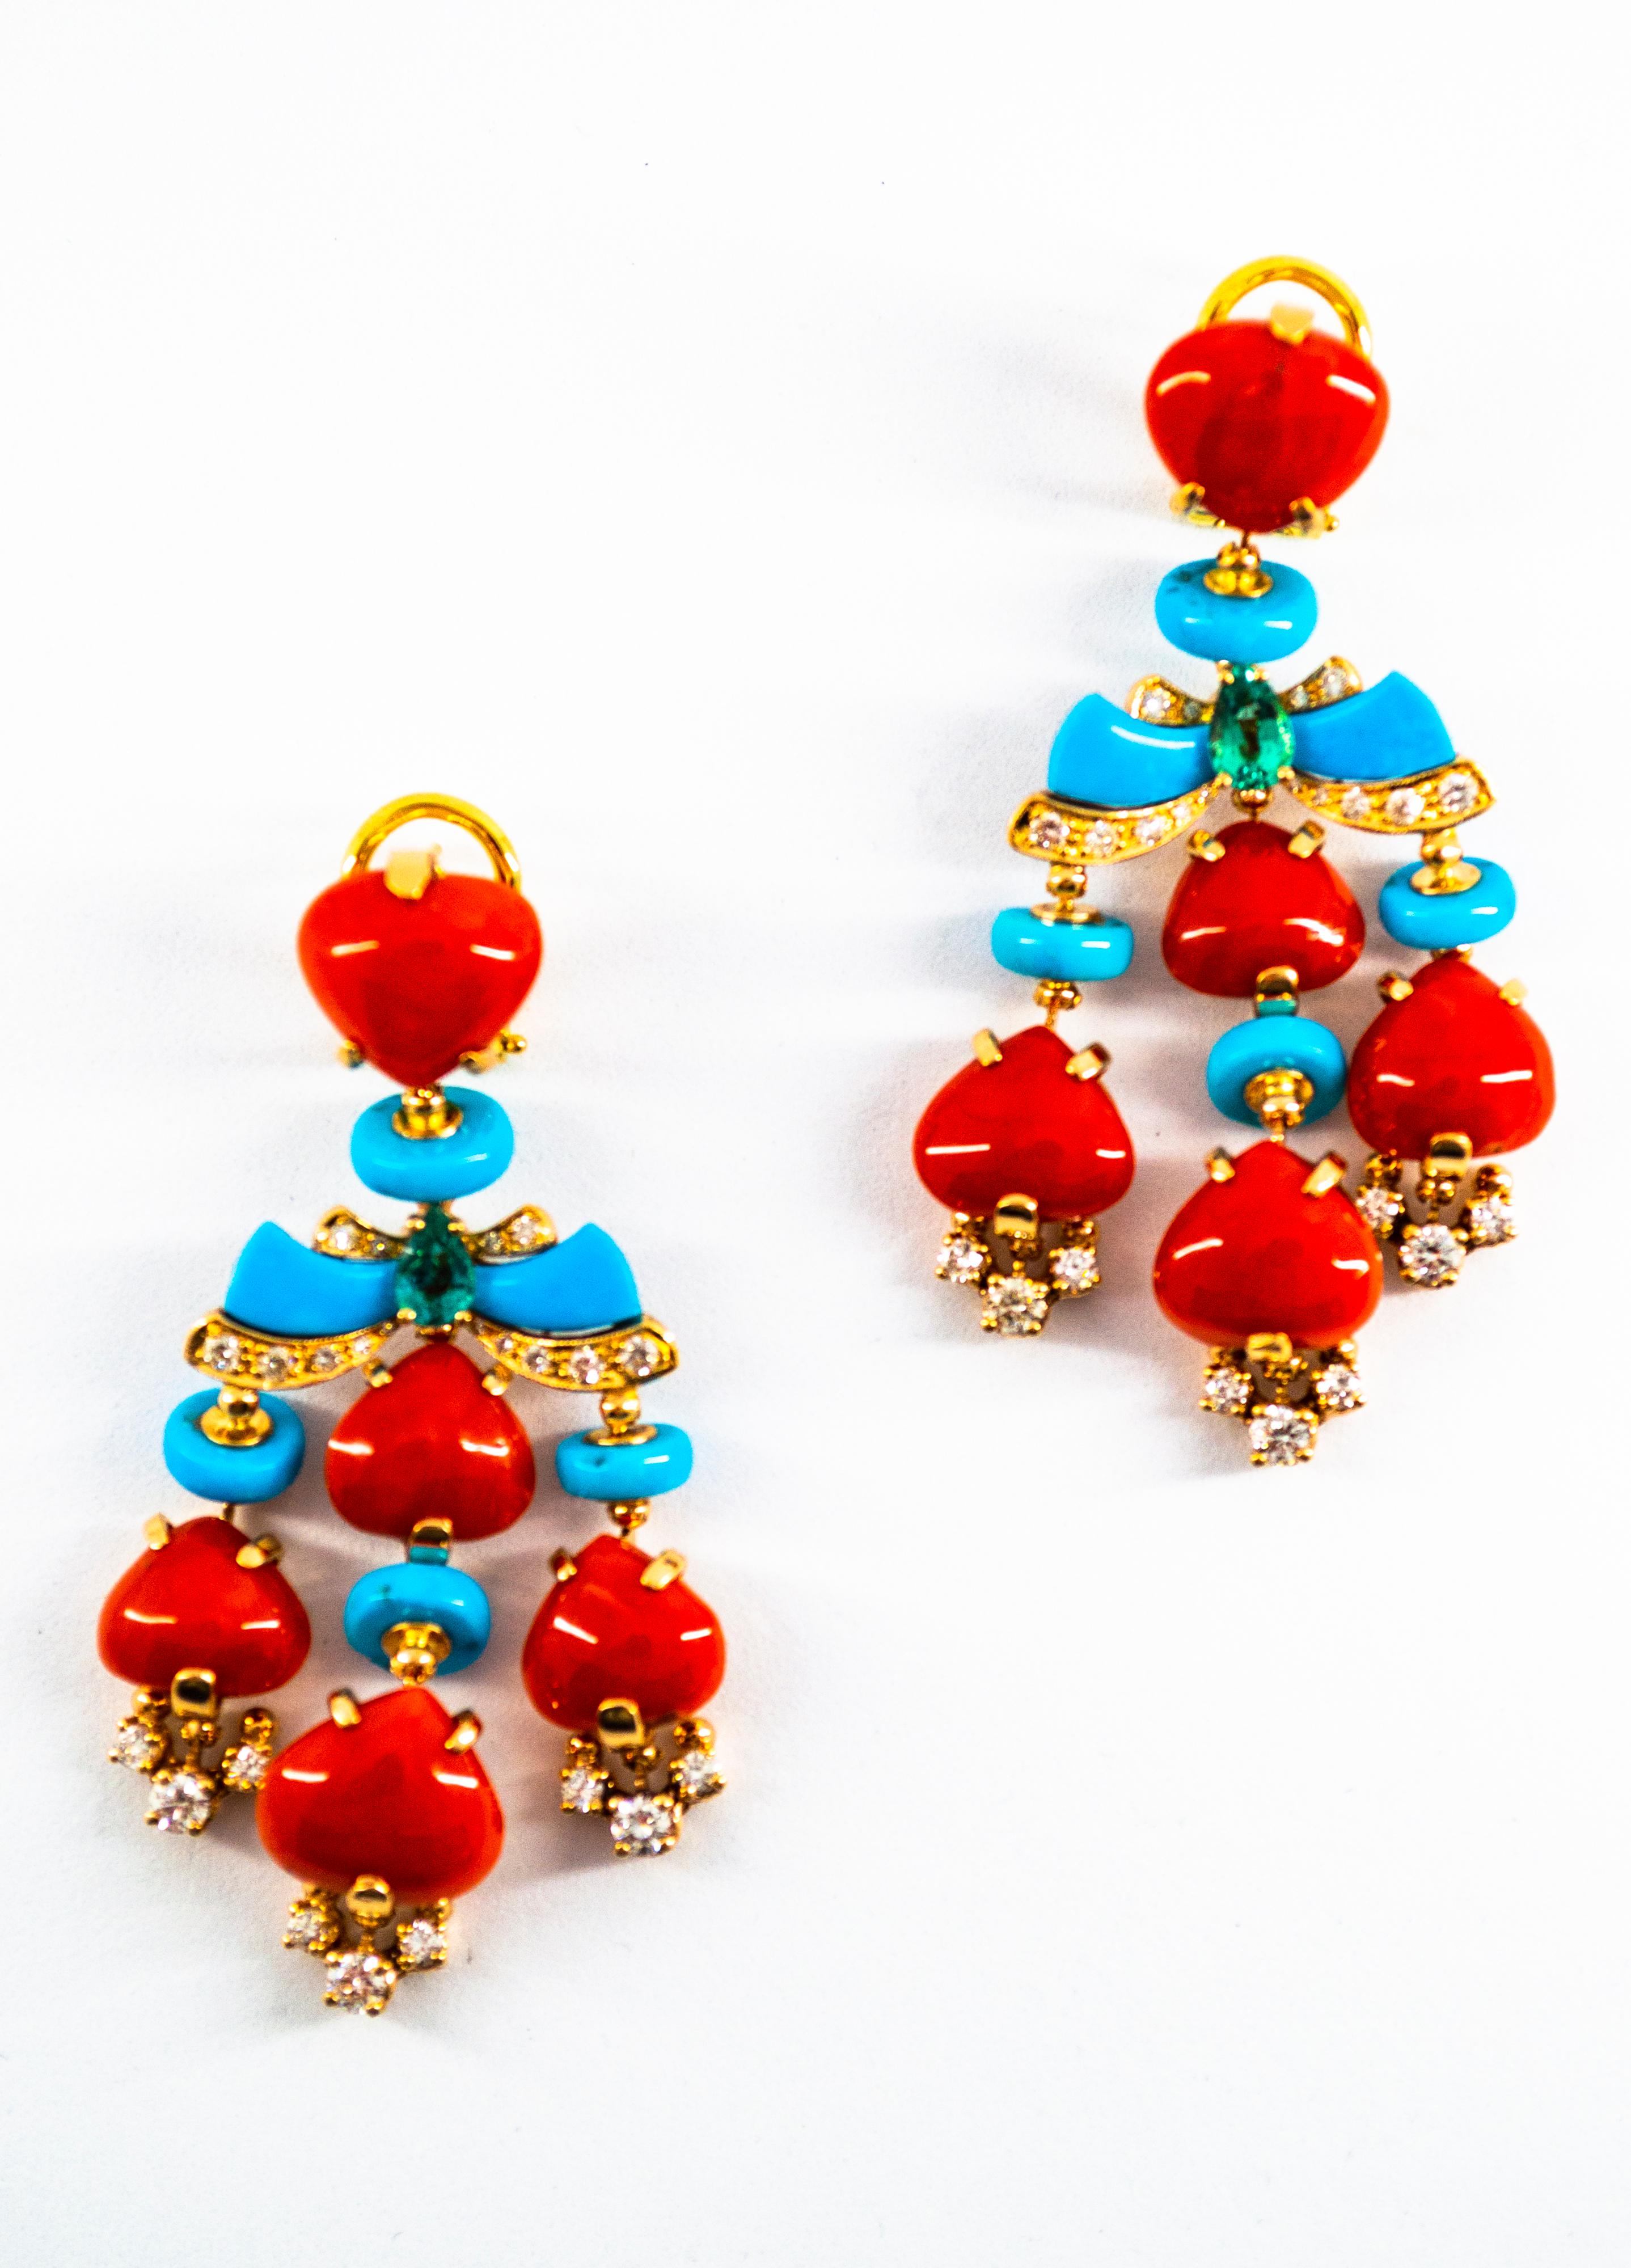 These Earrings are made of 14K Yellow Gold.
These Earrings have 1.35 Carats of White Modern Round Cut Diamonds.
These Earrings have 0.50 Carats of Emeralds.
These Earrings have also Mediterranean (Sardinia, Italy) Red Coral and Turquoise.
All our